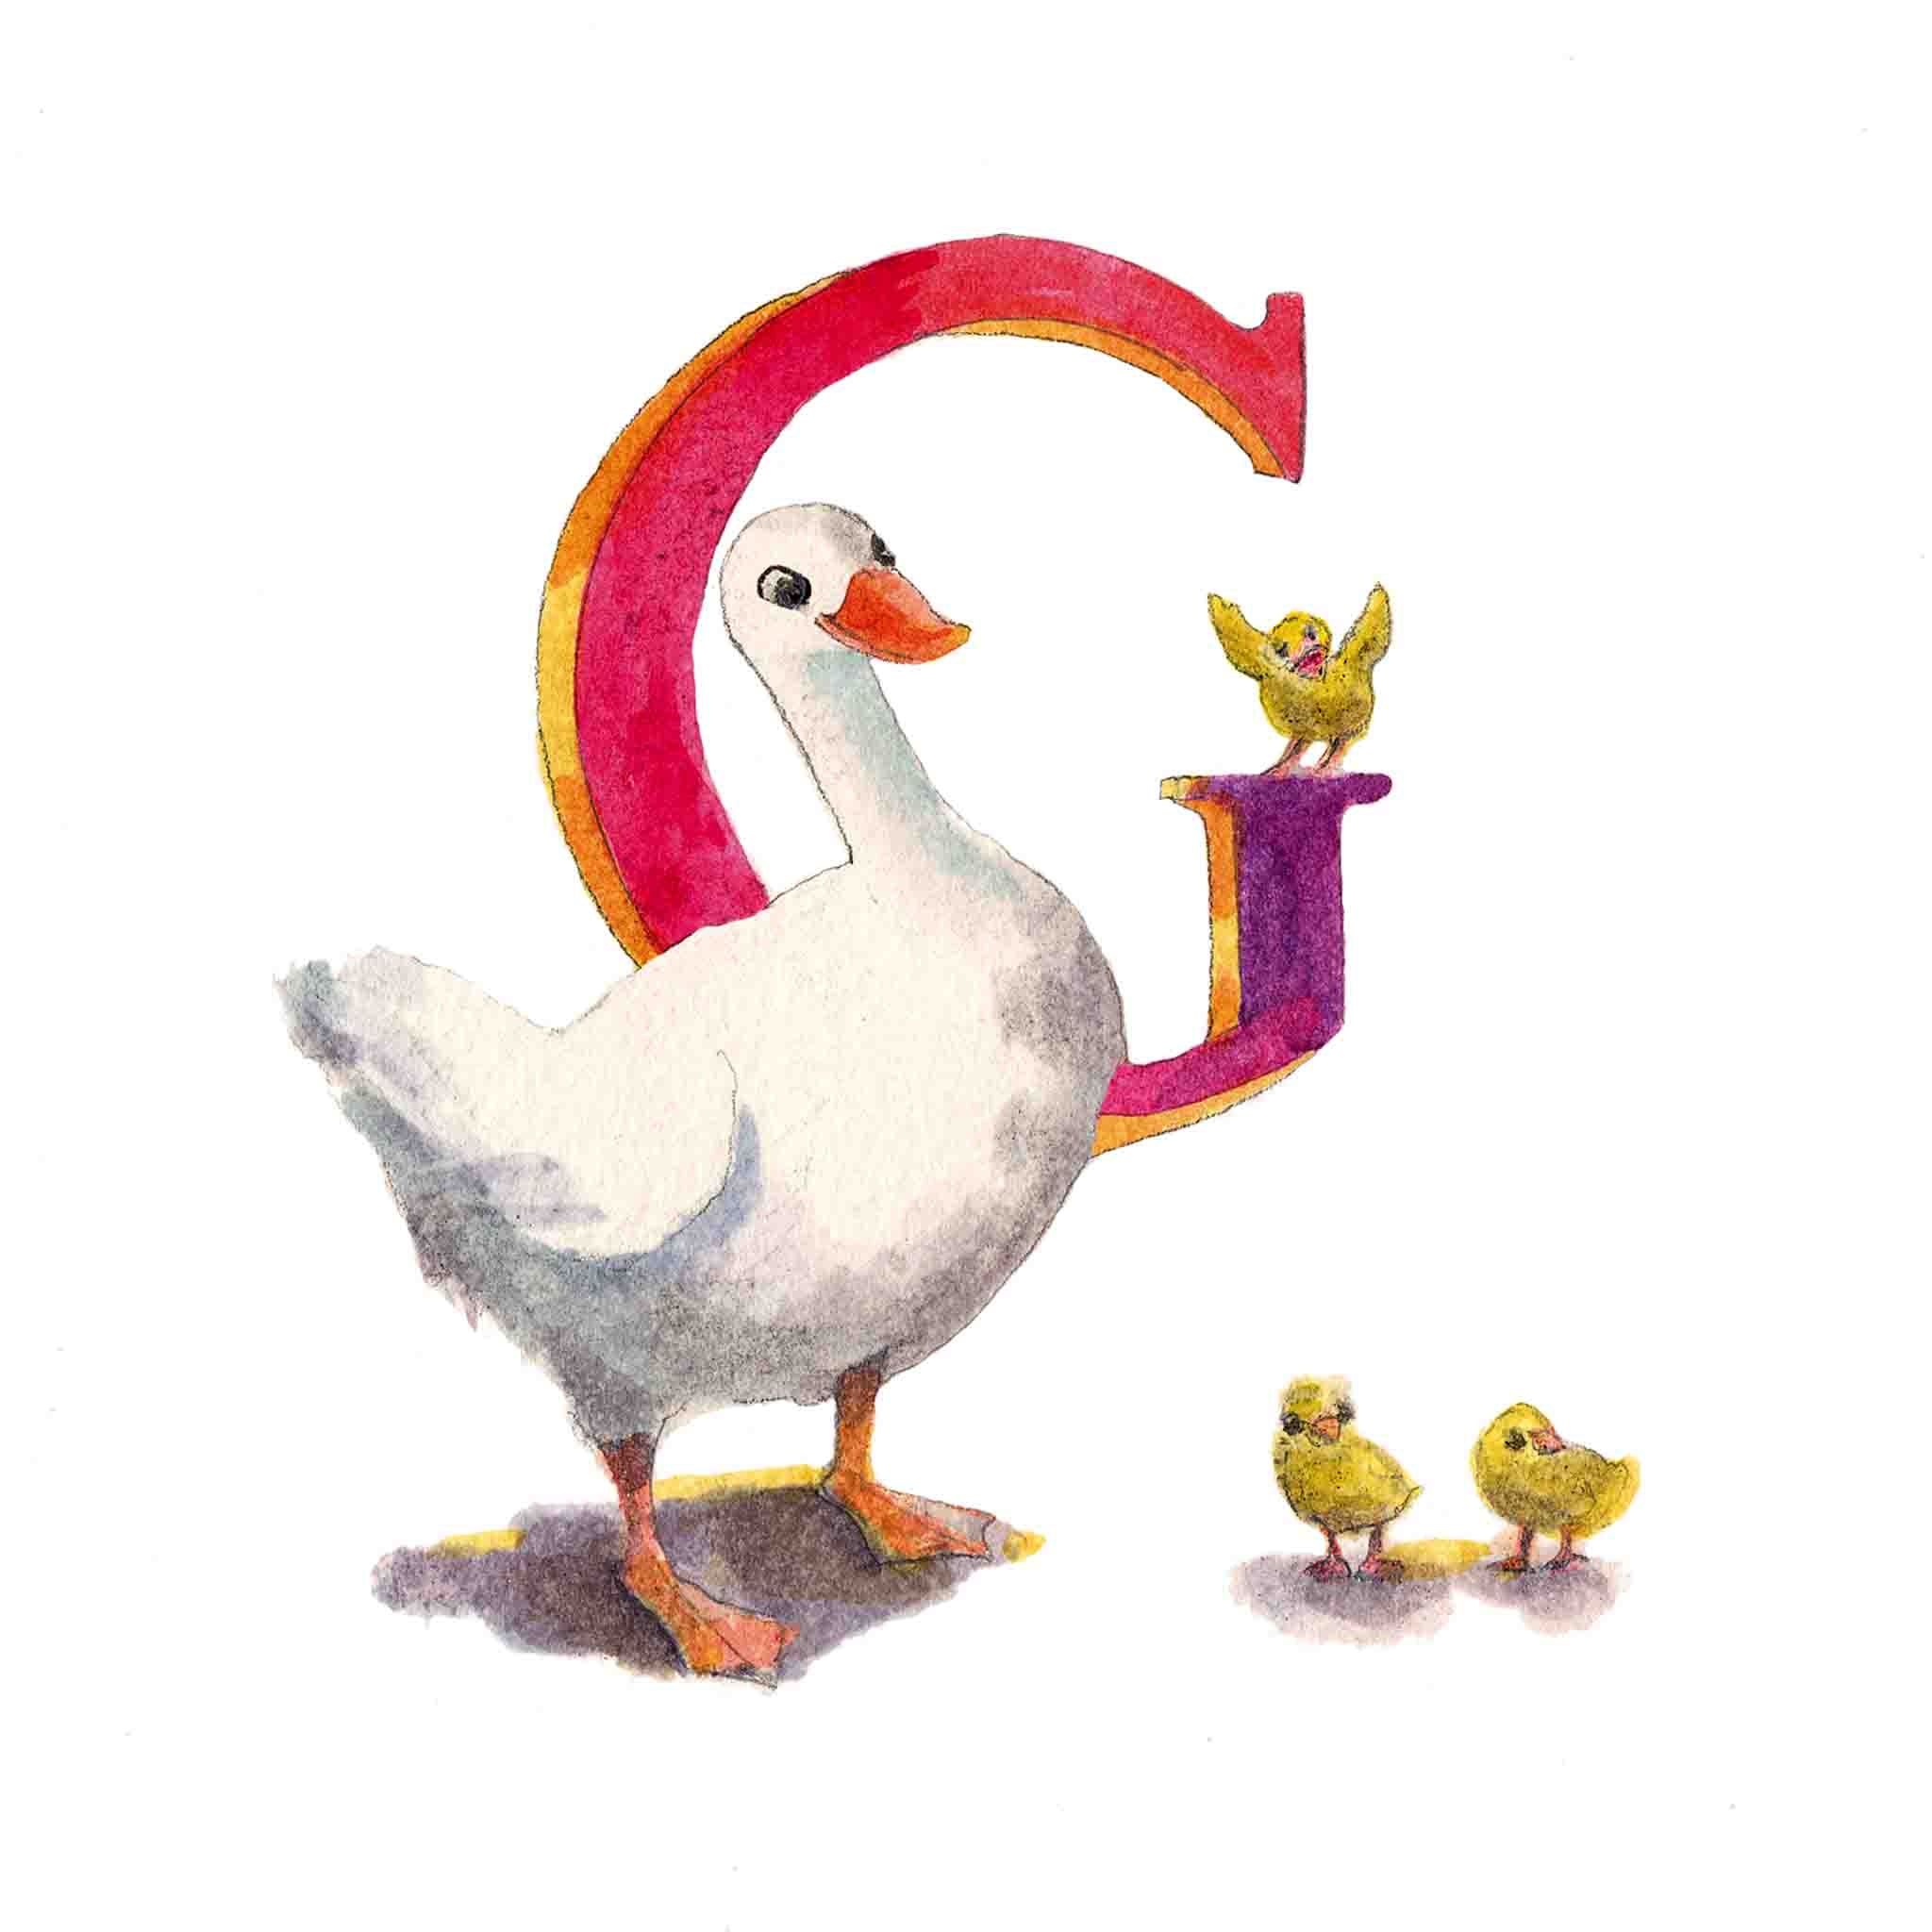 G for Goose